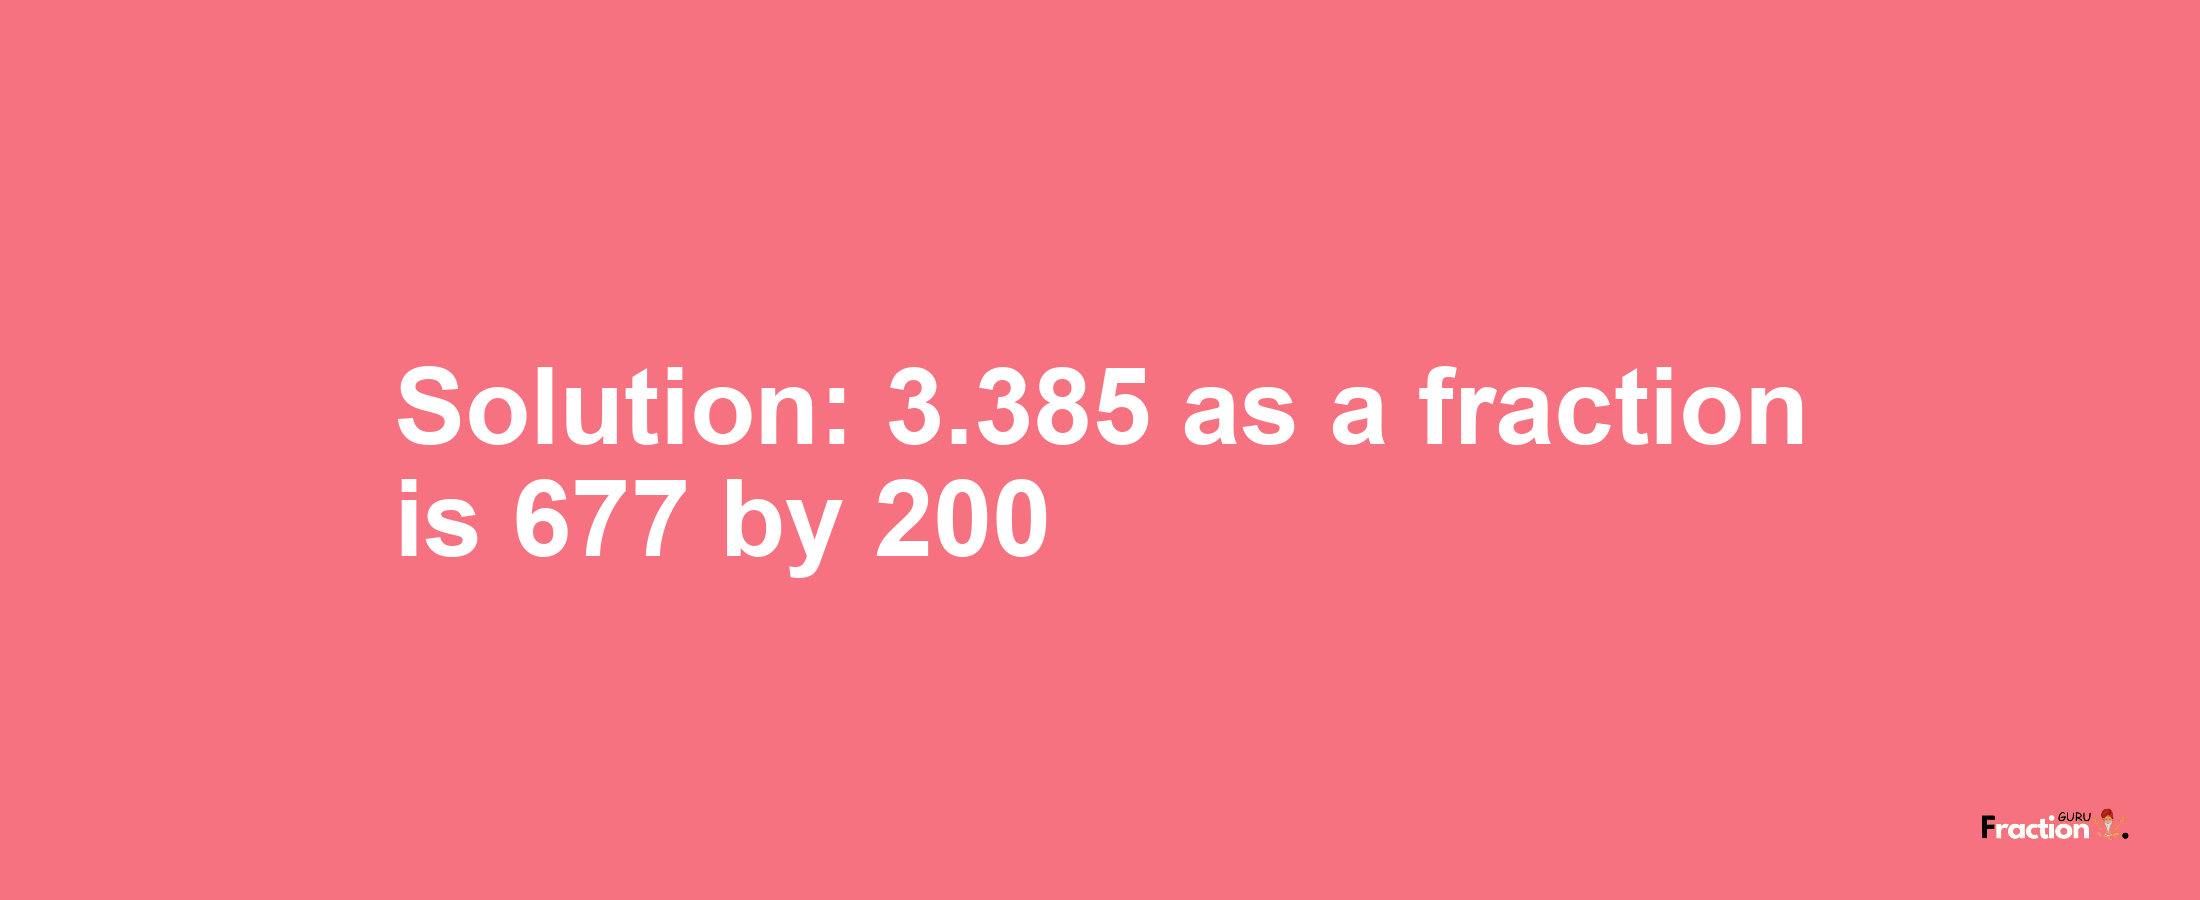 Solution:3.385 as a fraction is 677/200